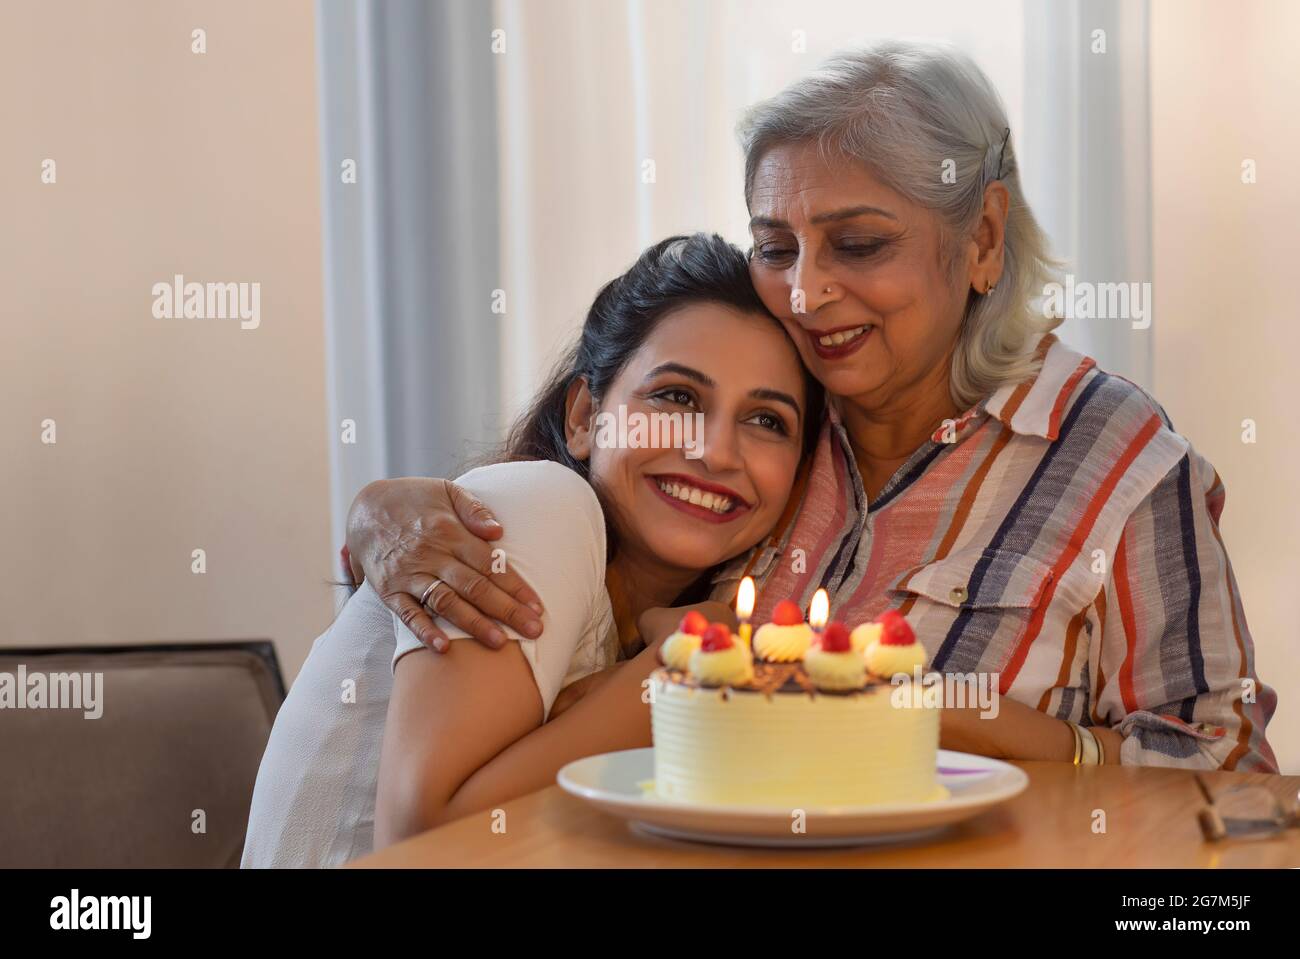 A YOUNG DAUGHTER LOVINGLY HUGGING MOTHER WITH CAKE IN FRONT OF THEM Stock Photo